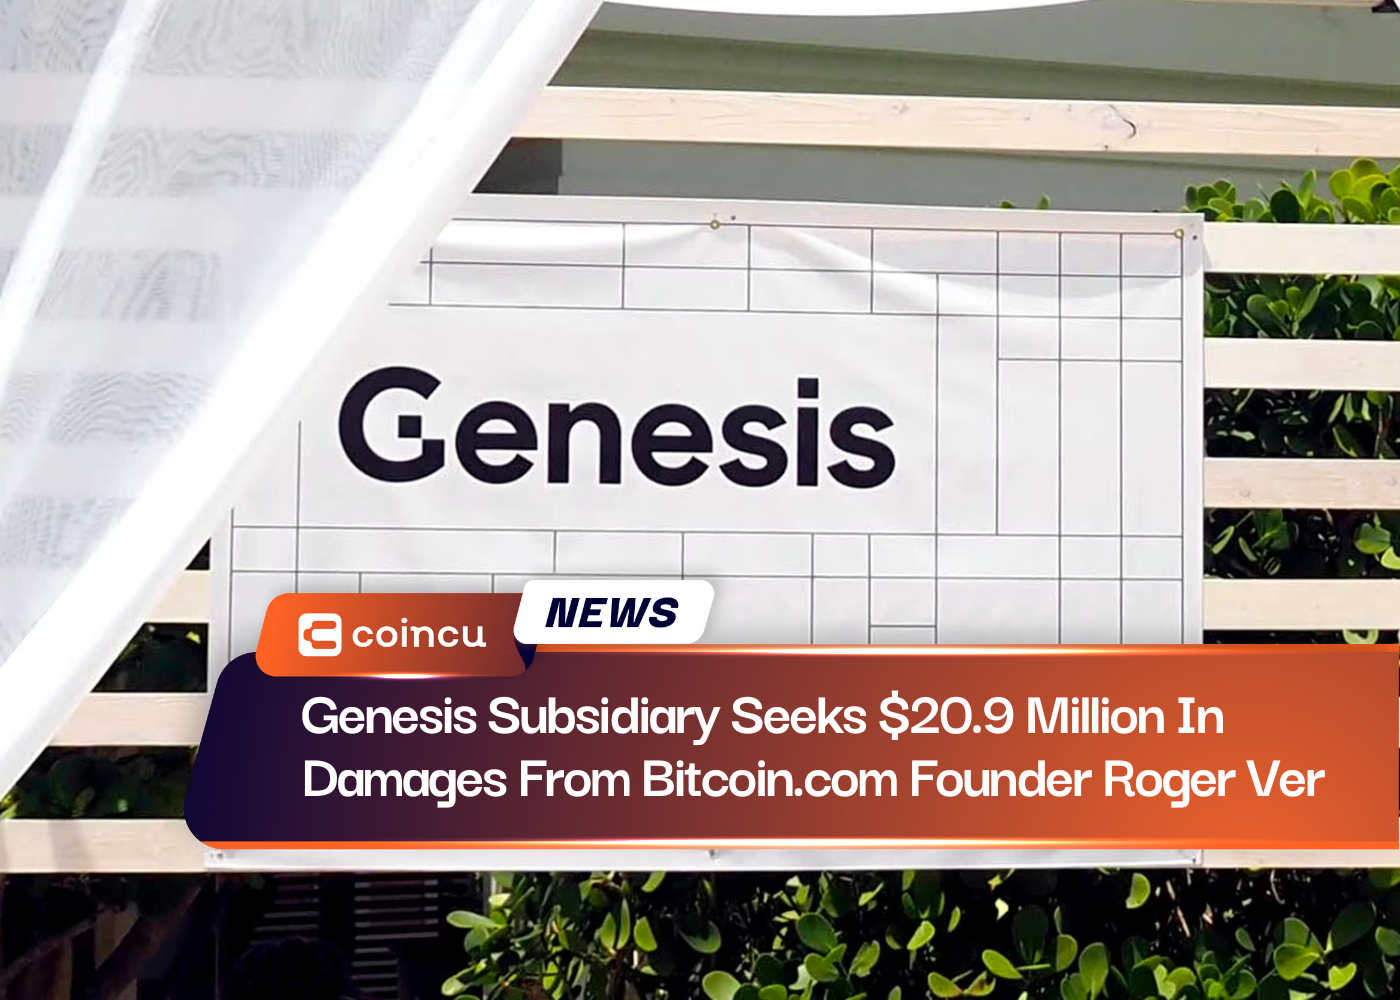 Genesis Subsidiary Seeks $20.9 Million In Damages From Bitcoin.com Founder Roger Ver